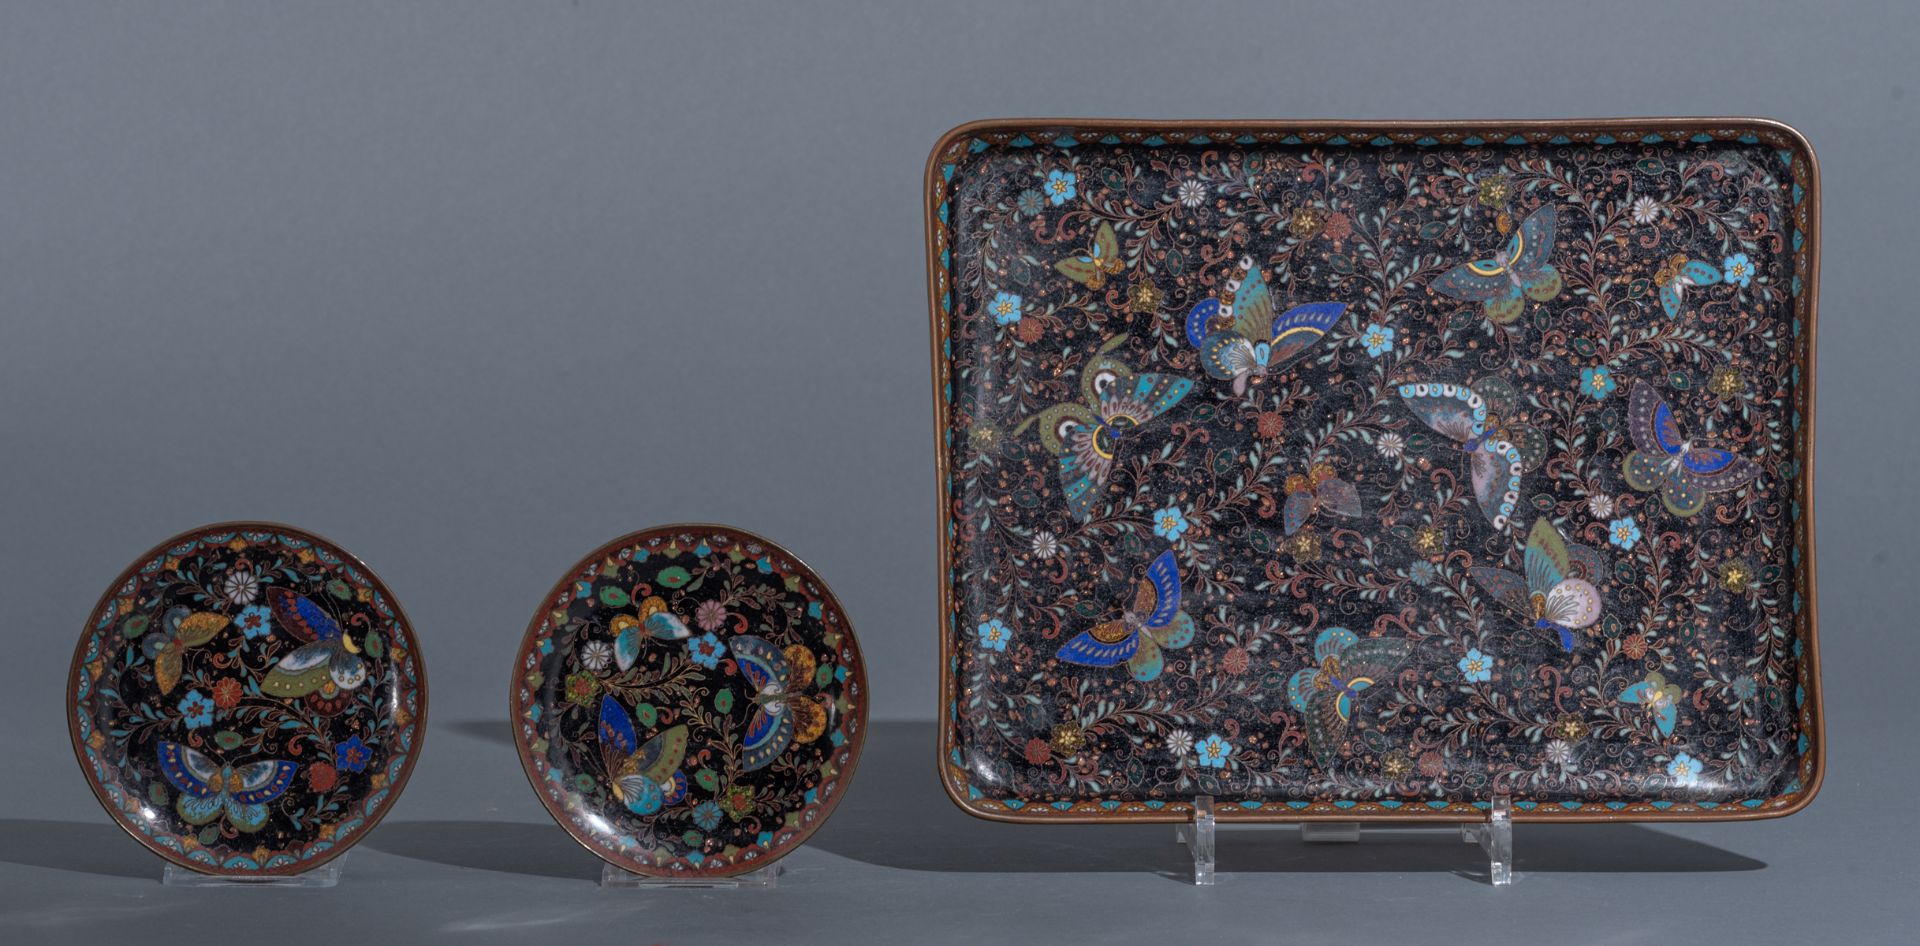 A Japanese cloisonné enamel tea set, i.e. a tray, two cups and saucers, a teapot and cover, a milk j - Image 2 of 9